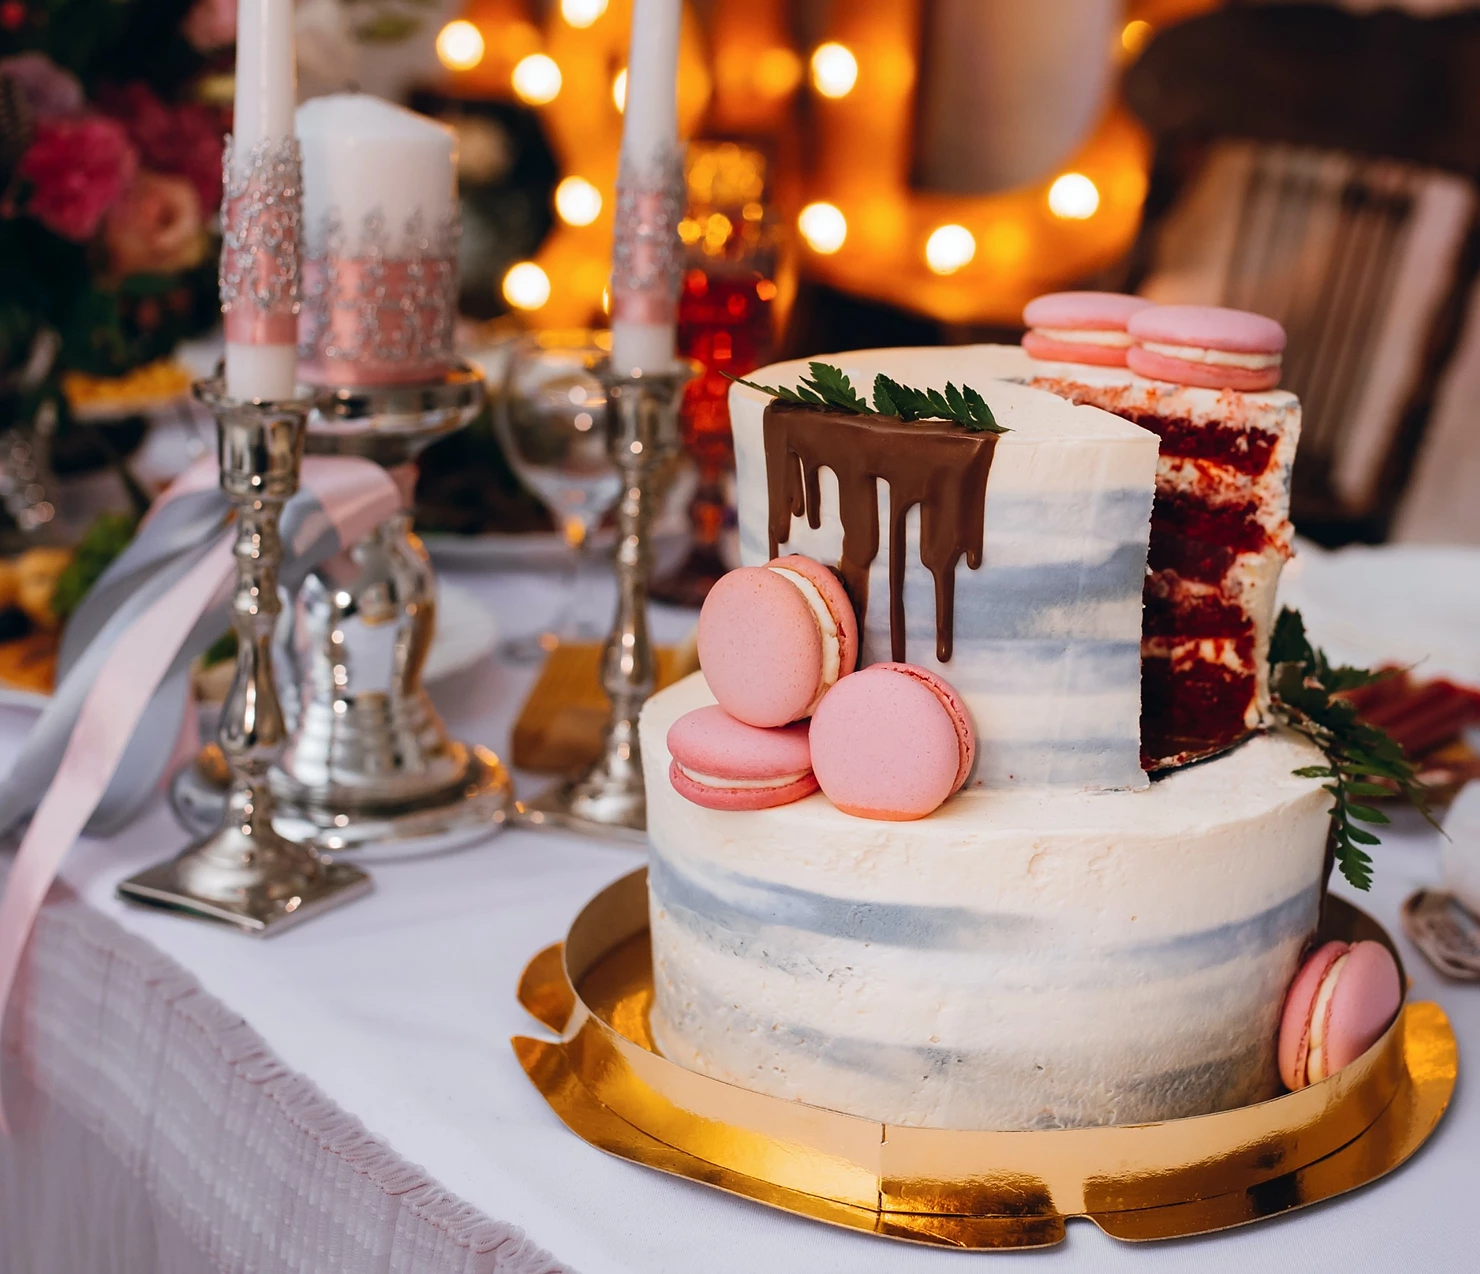 3 reasons why to go with Red Velvet Wedding Cake